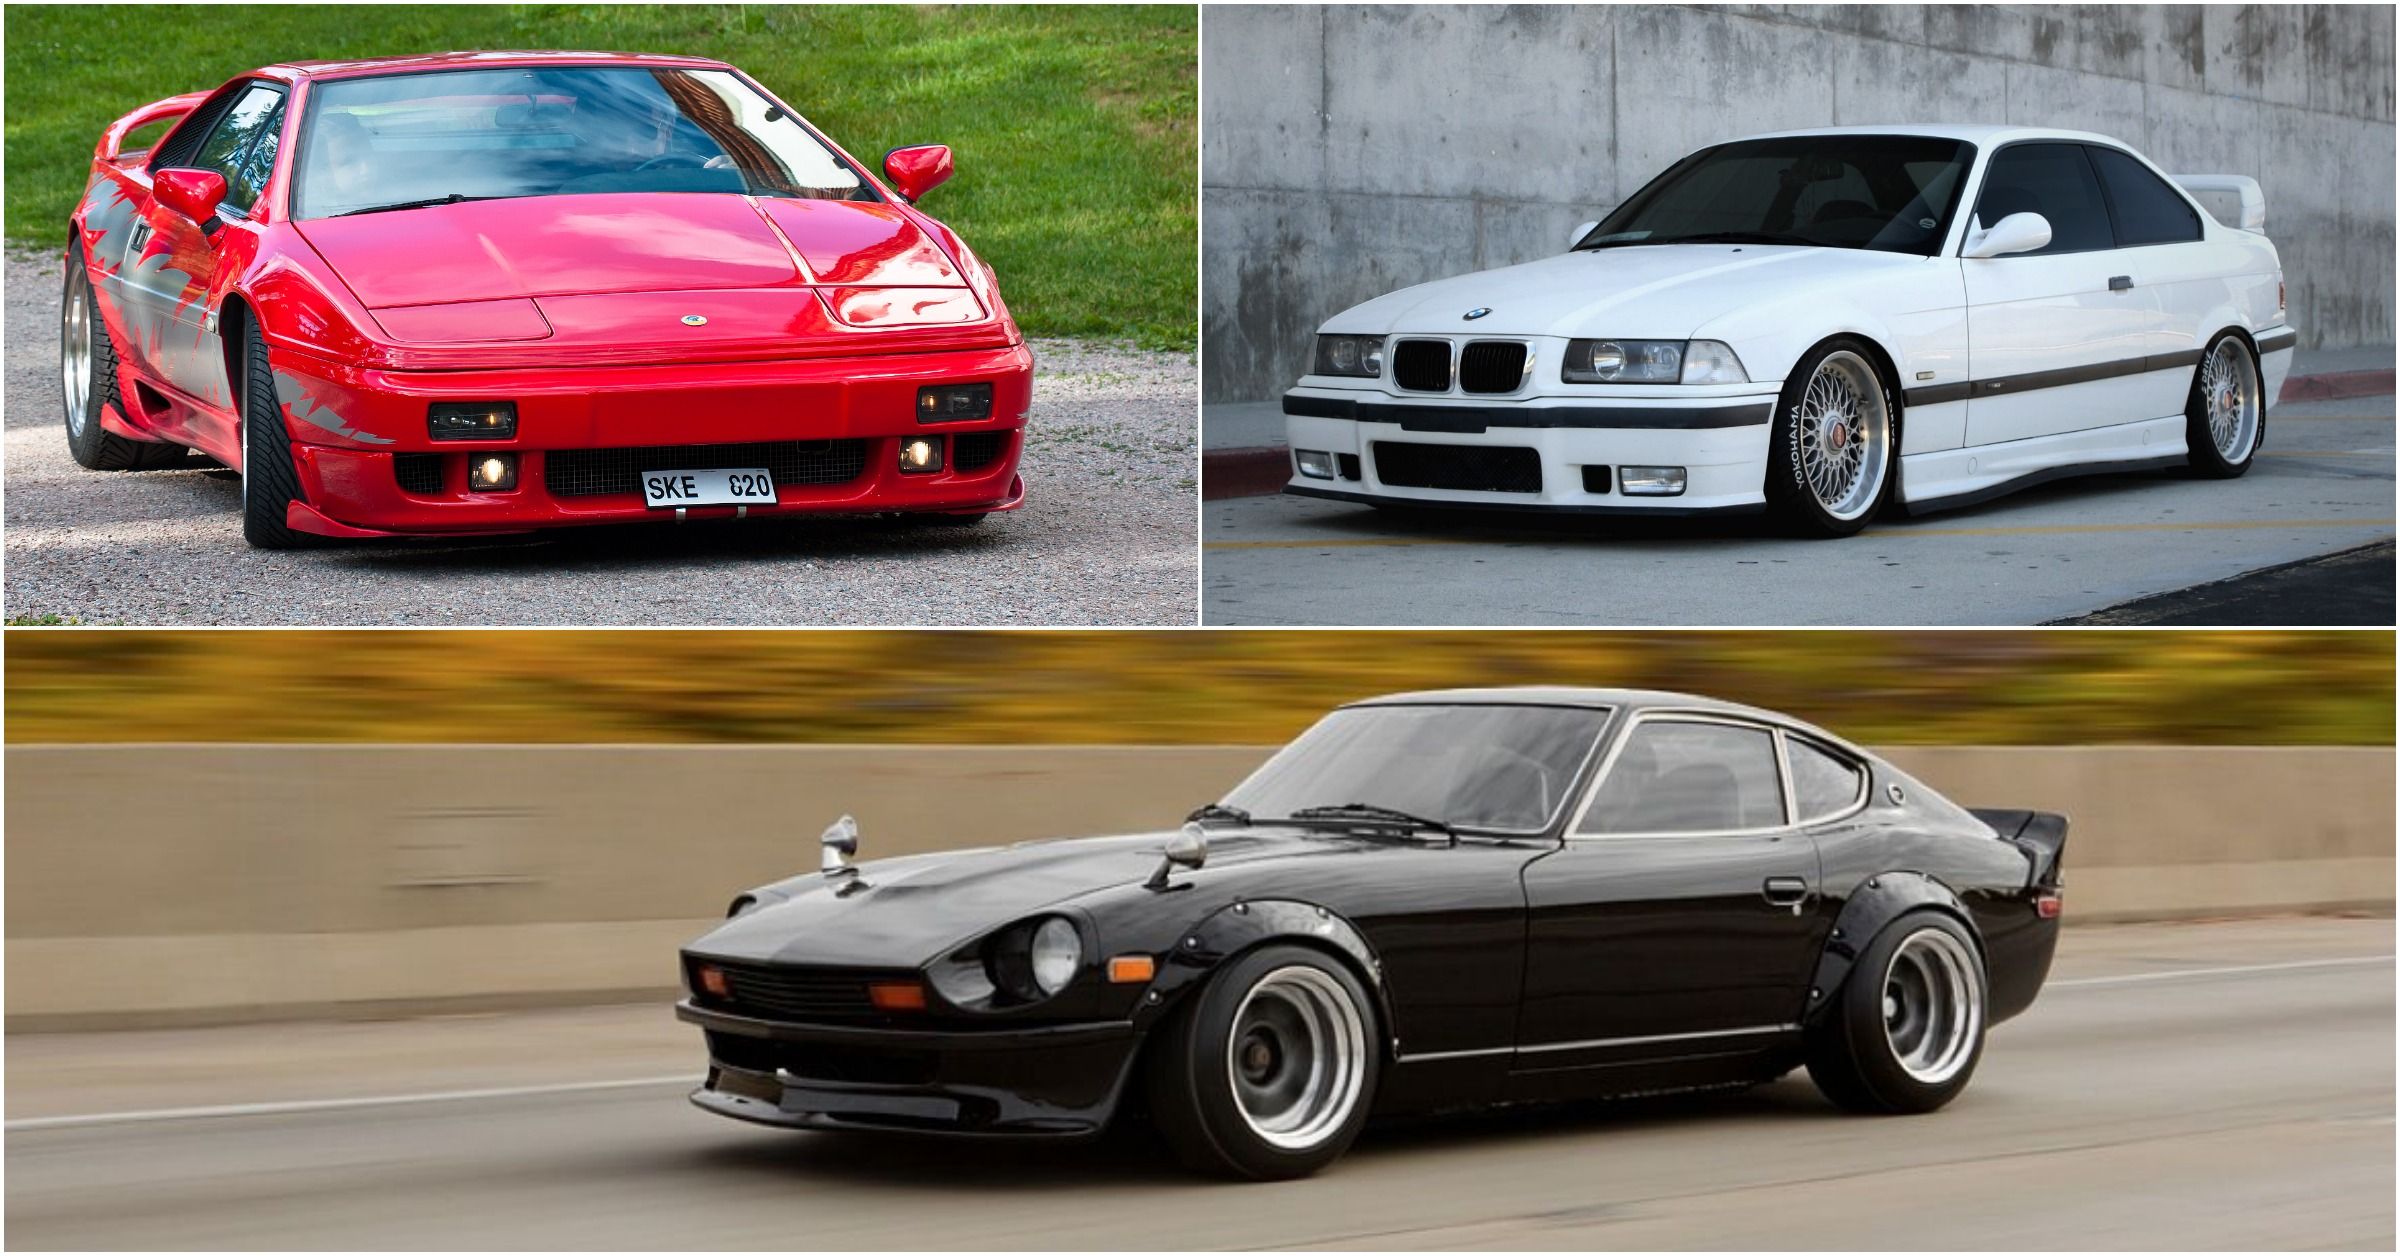 which sports car should i buy